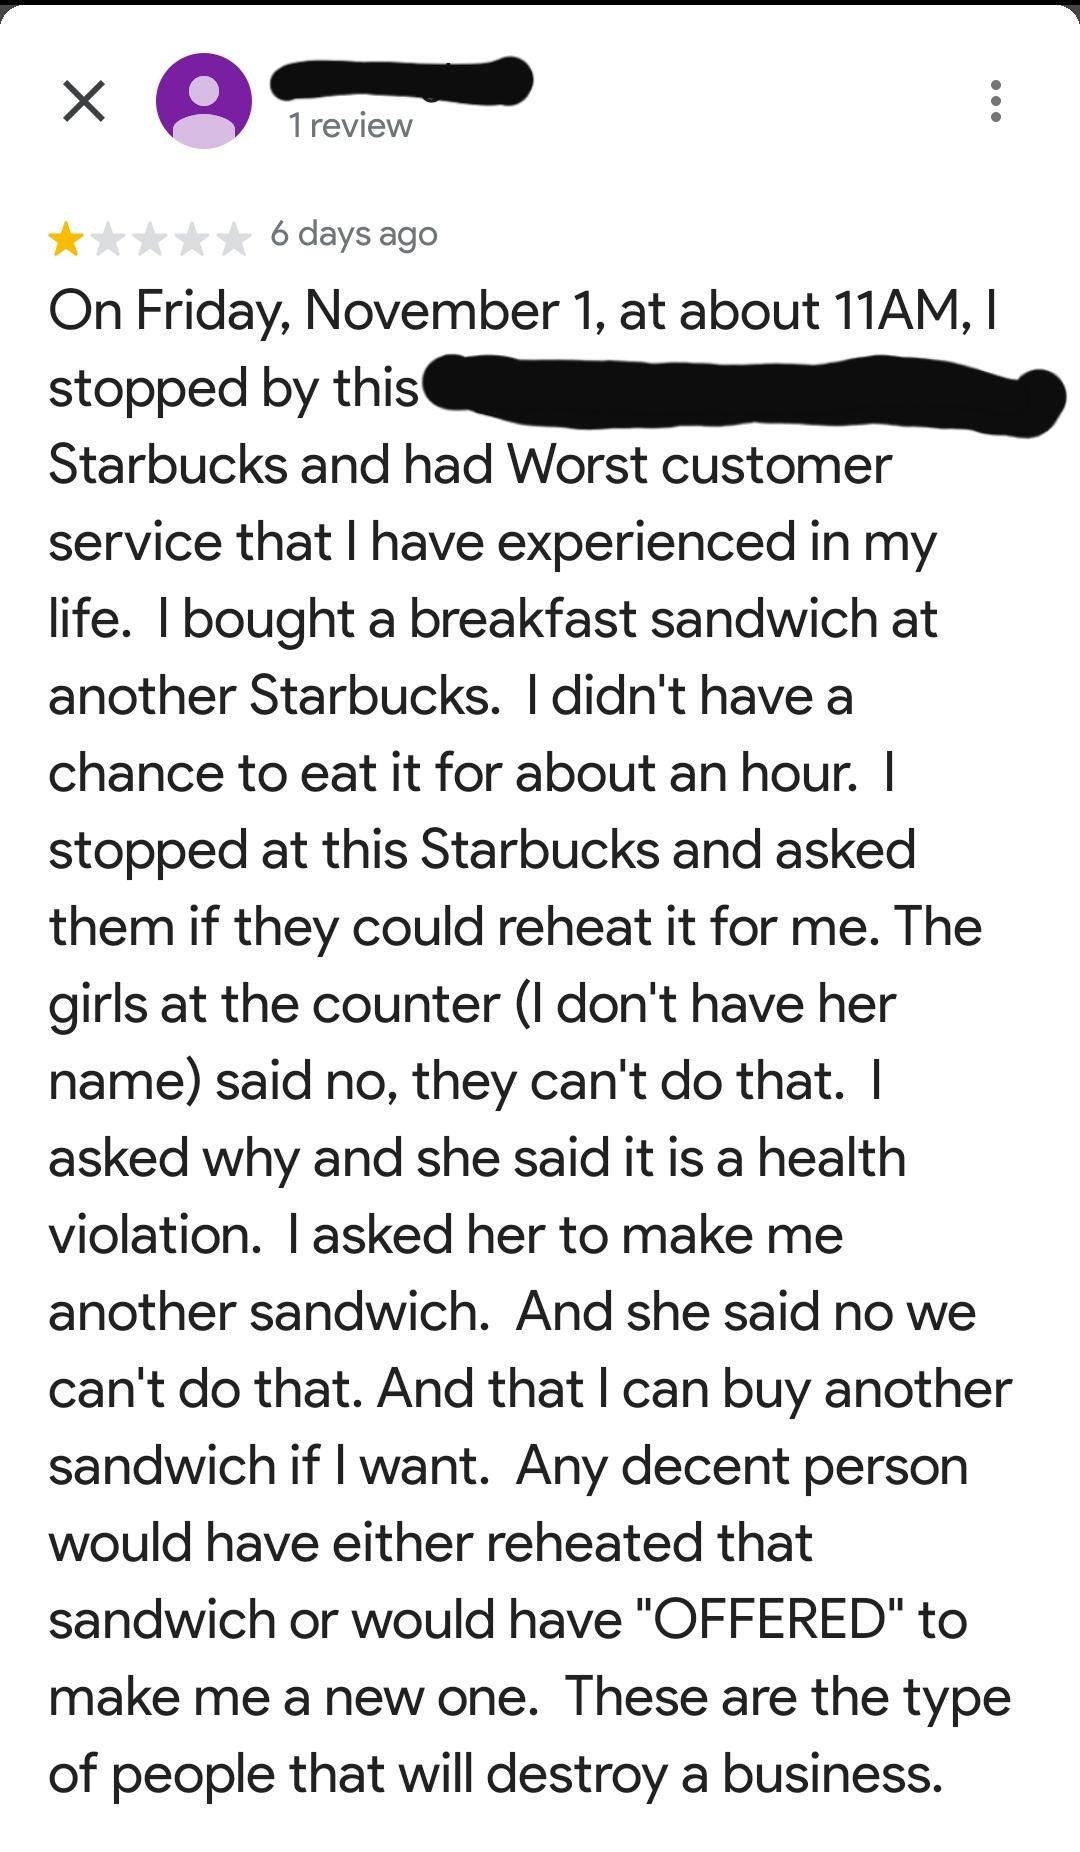 Someone complains that they brought a sandwich from Starbucks at one location and couldn&#x27;t get it reheated at another location